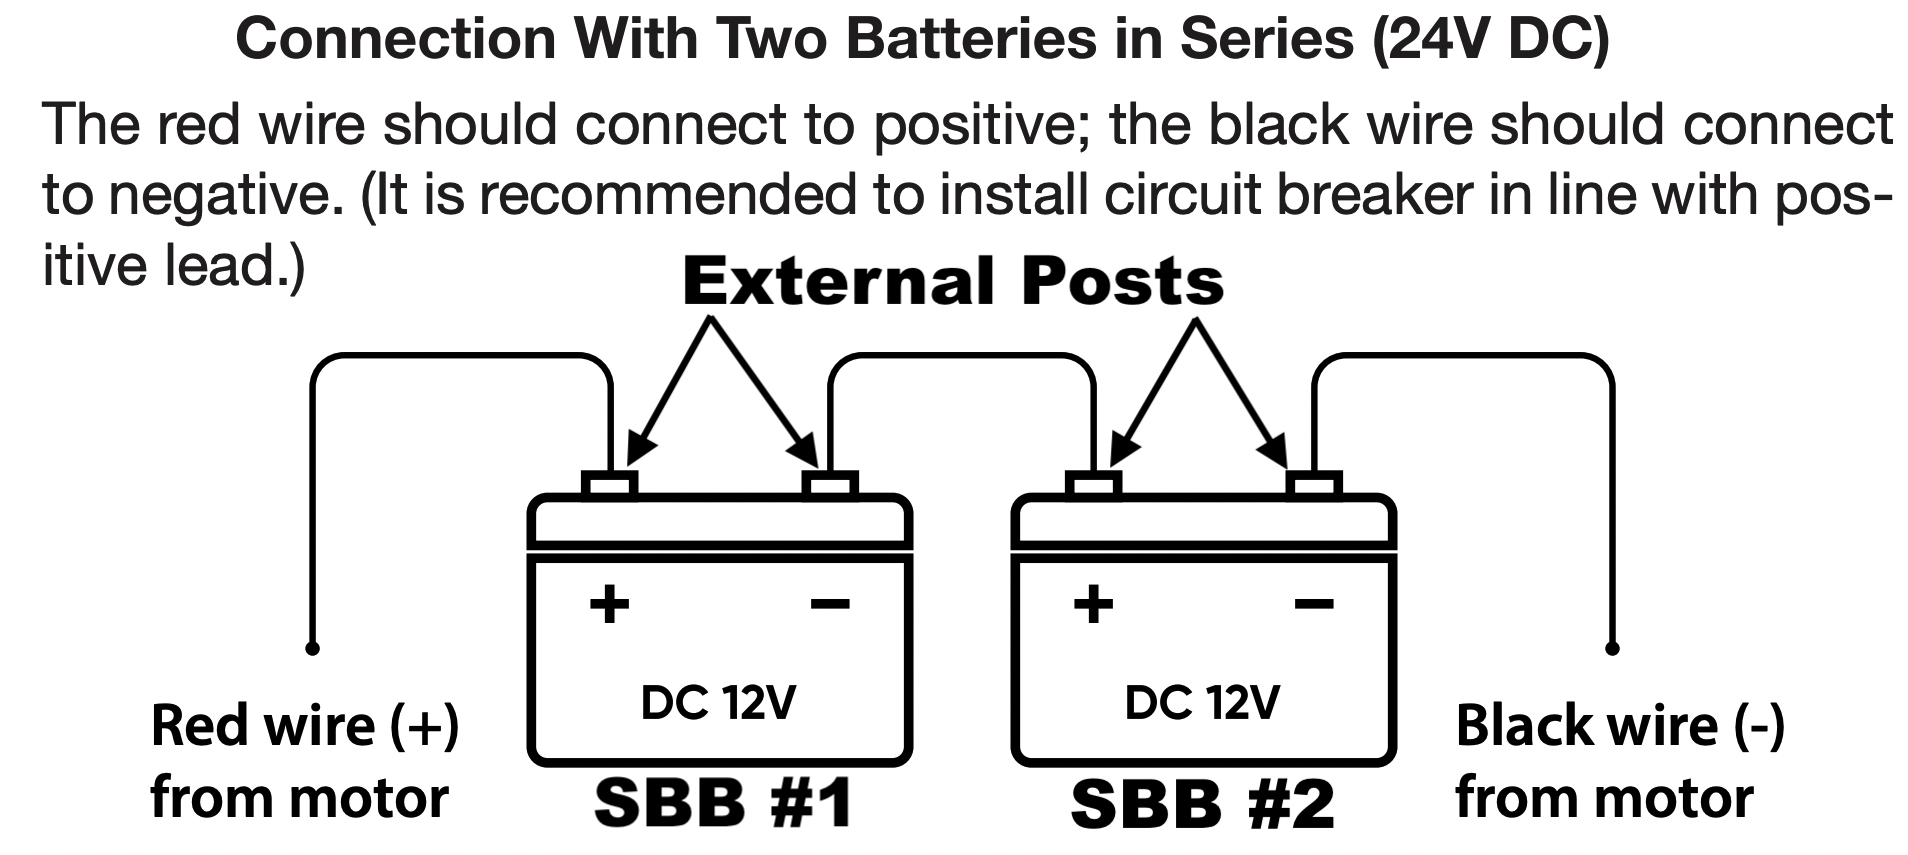 Connecting-batteries-in-series.png